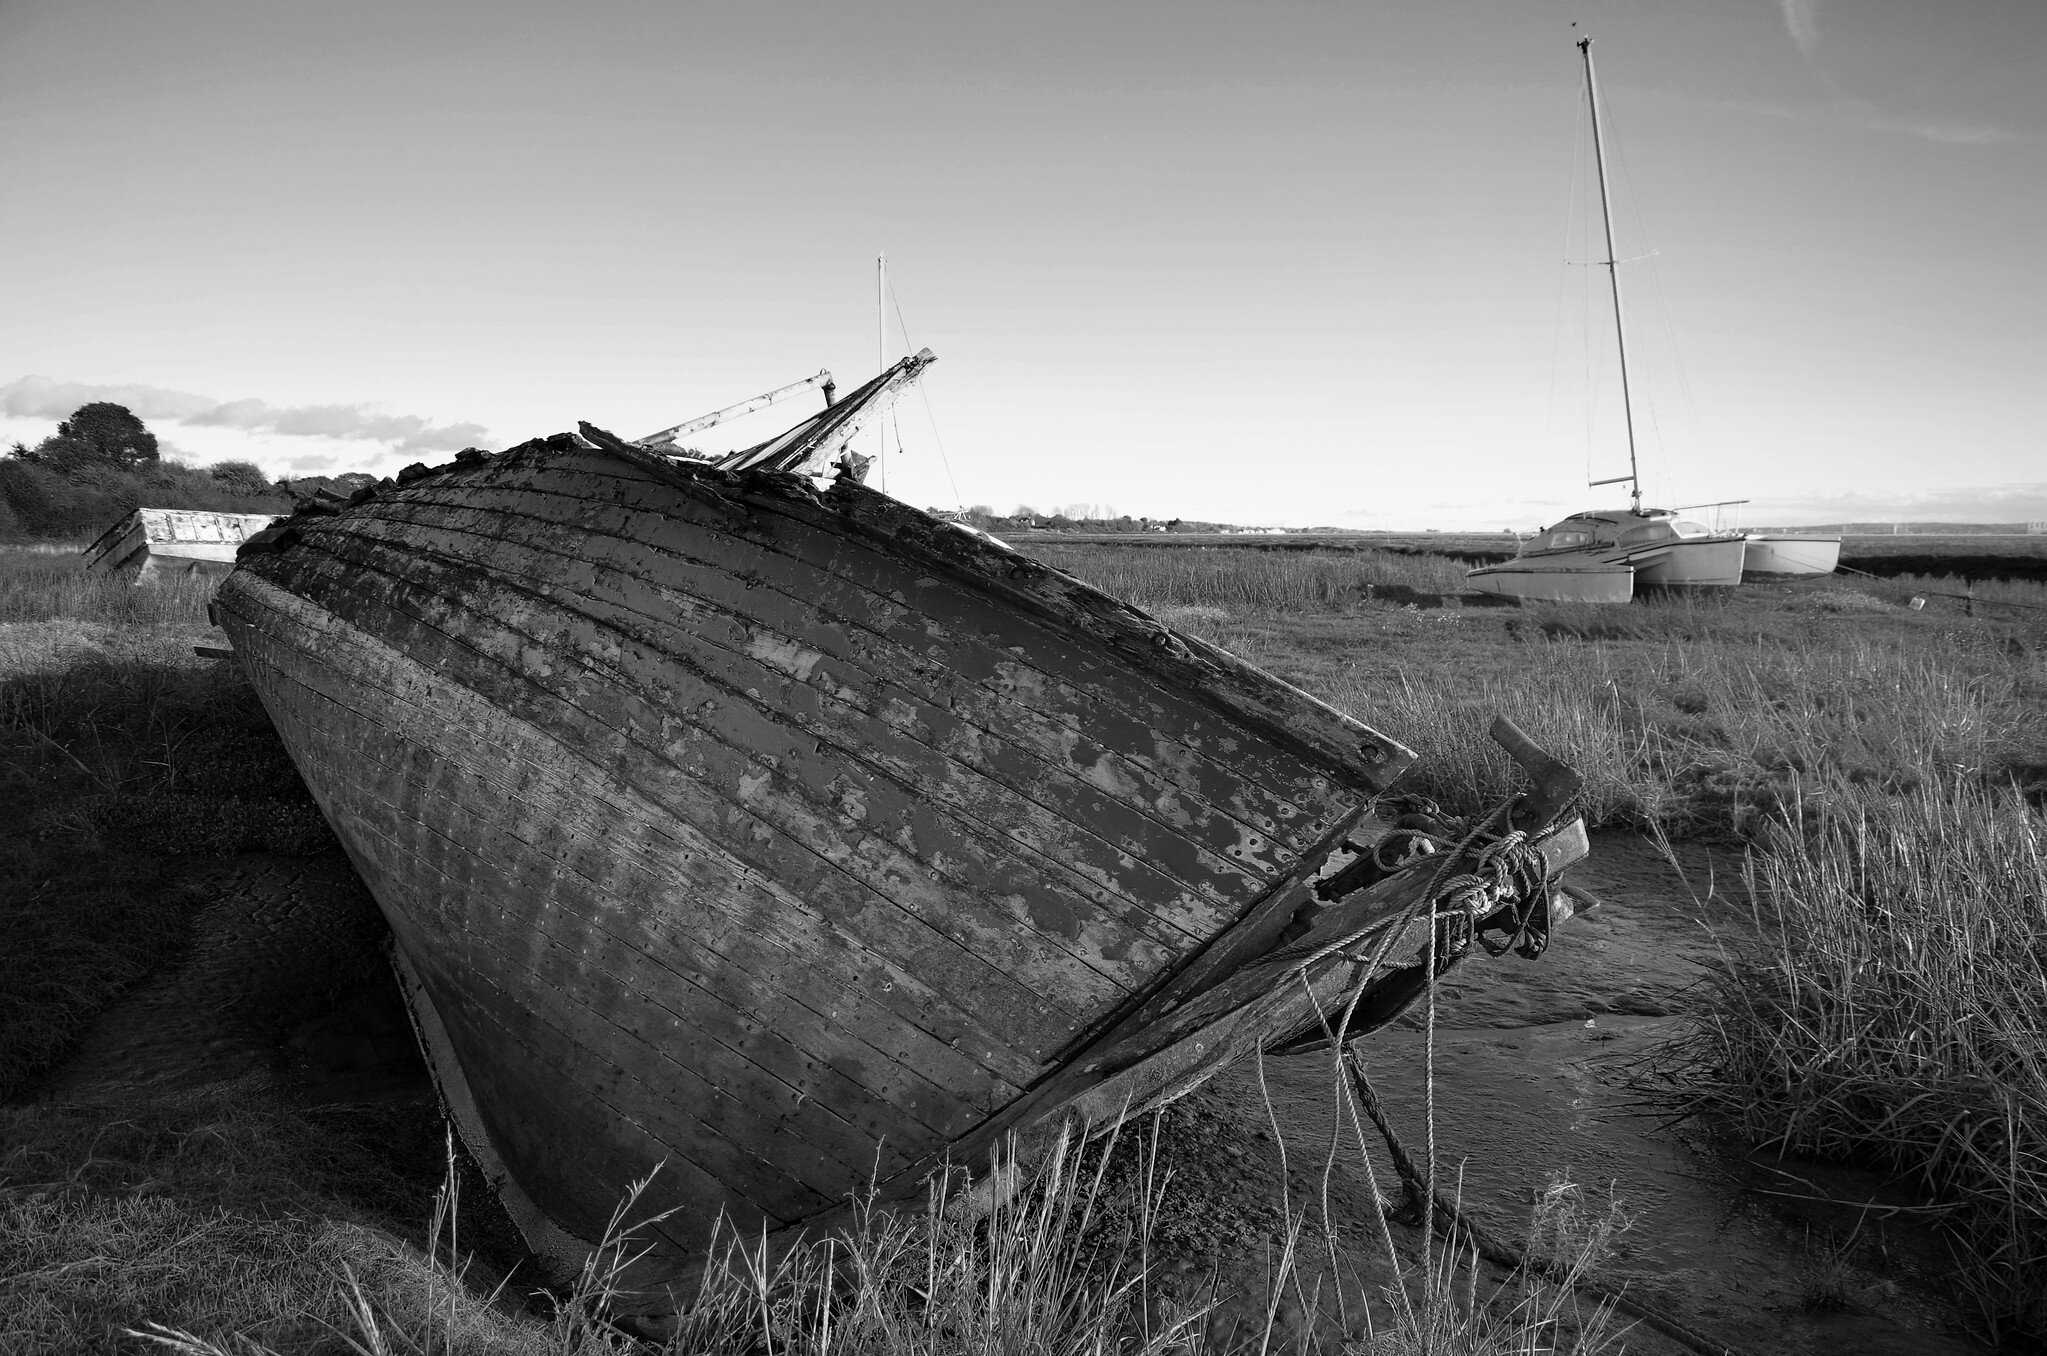 Boat beached on Heswall